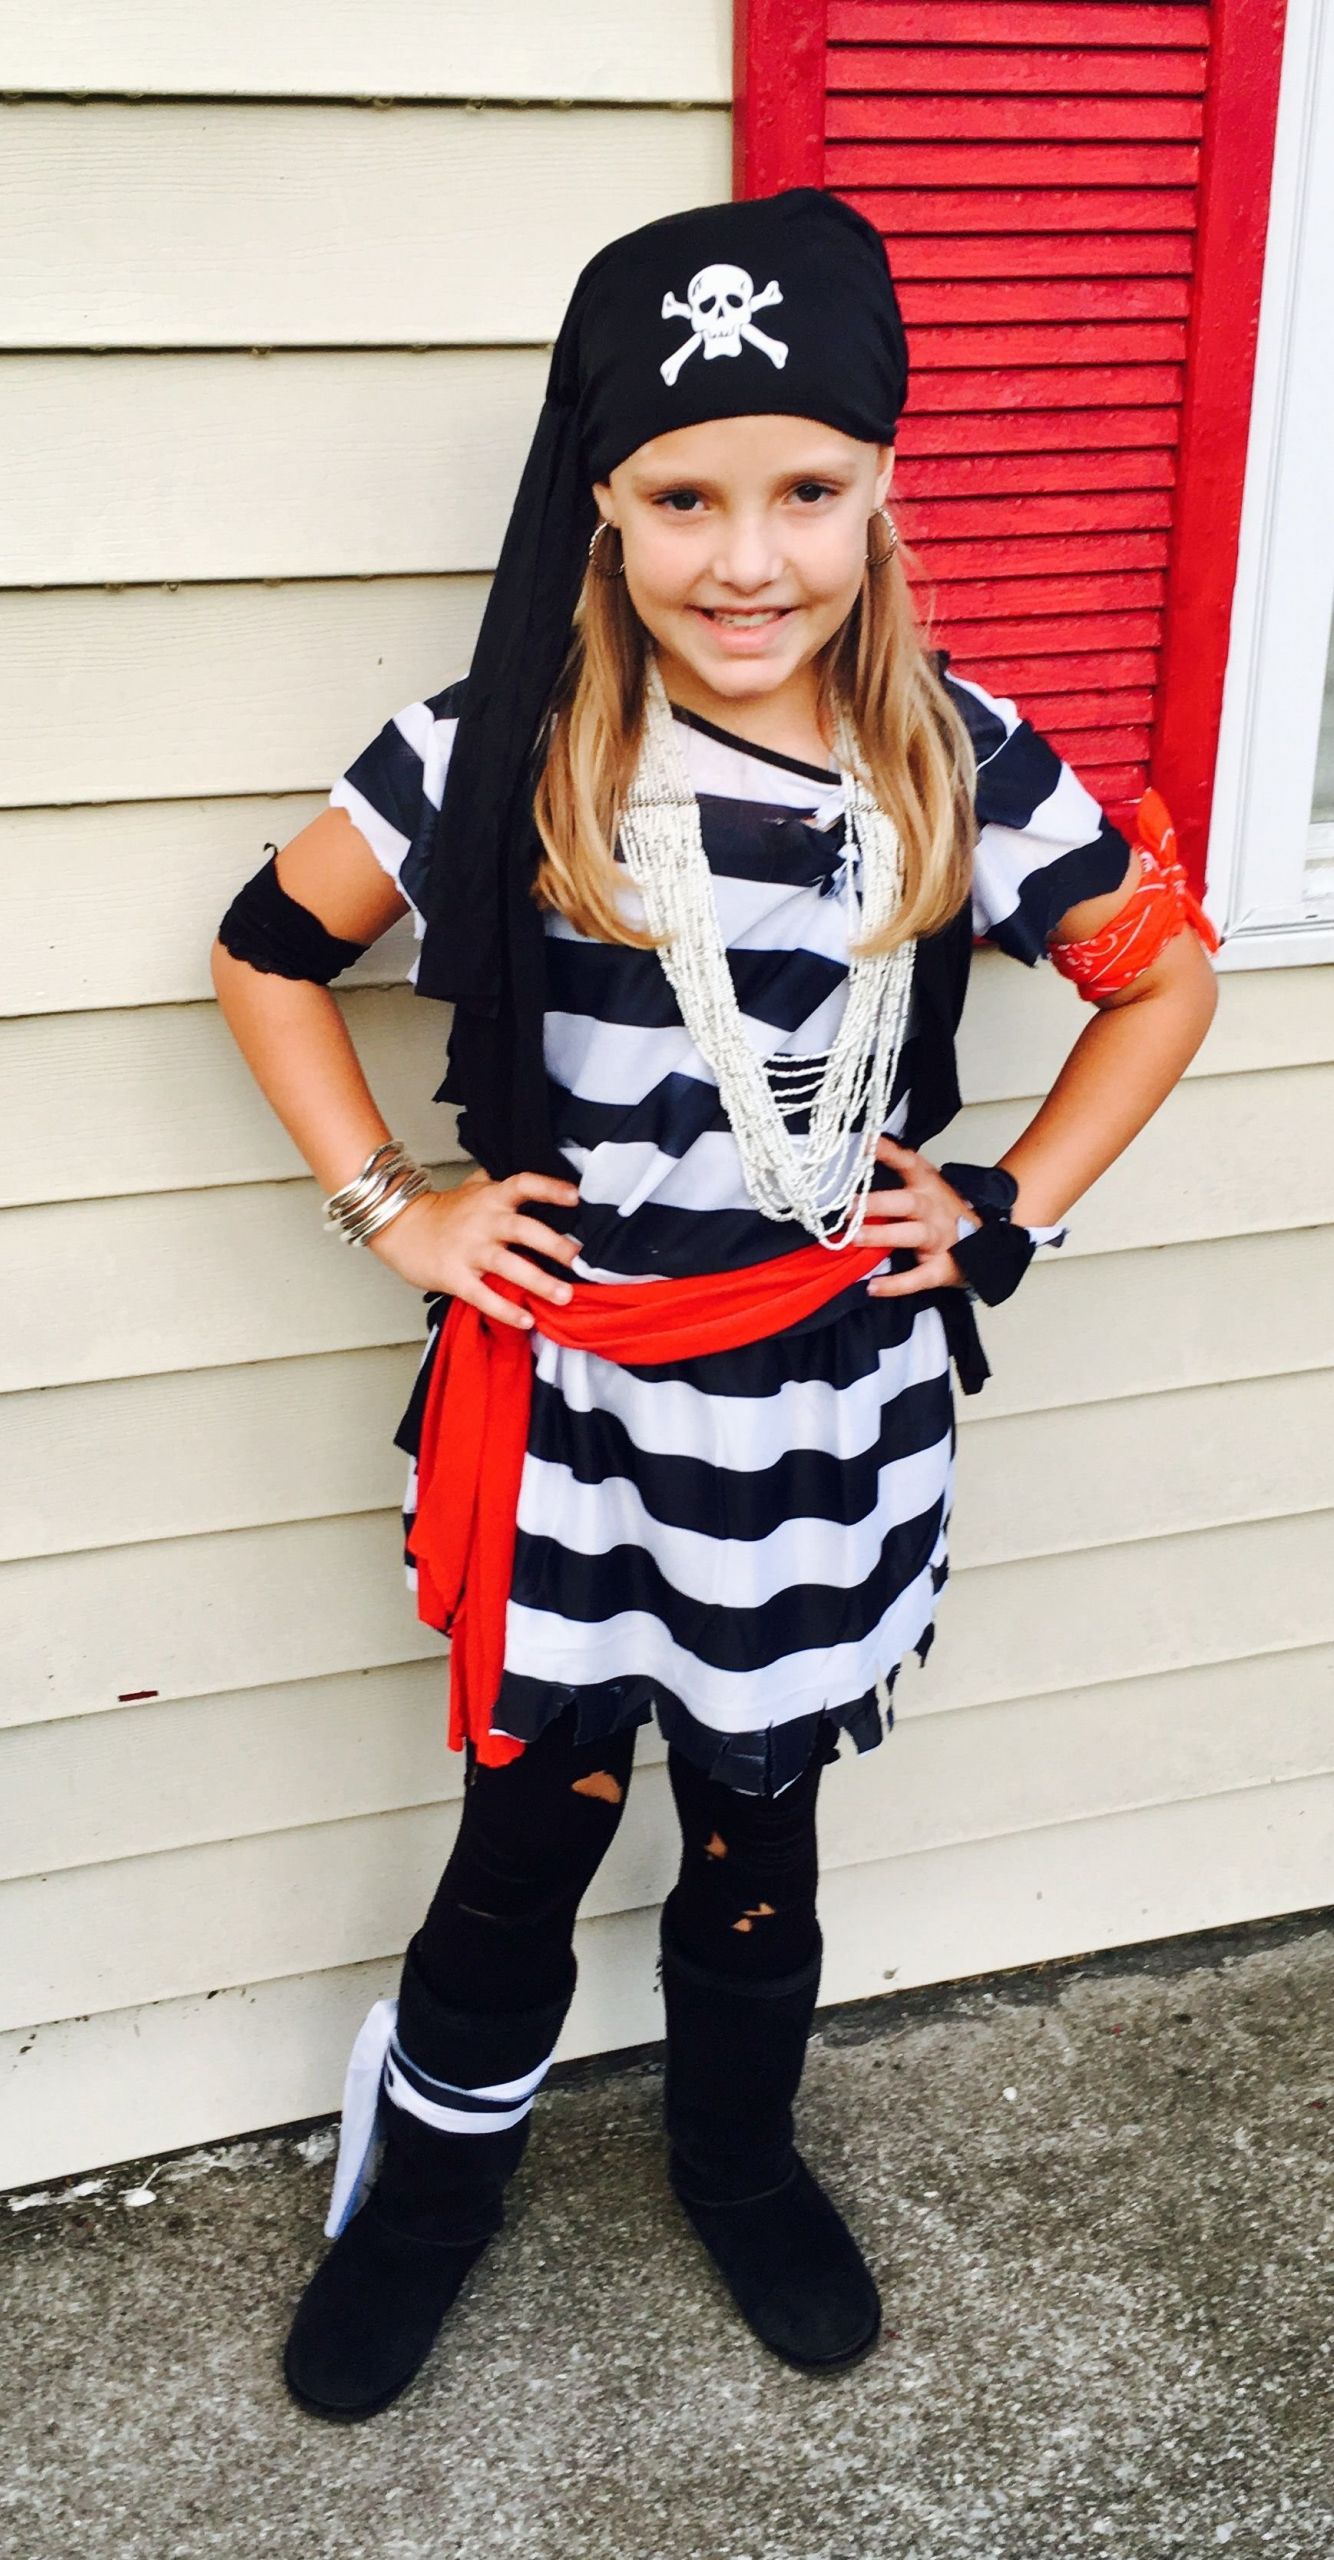 Easy DIY Kids Costumes
 10 Attractive Homemade Pirate Costume Ideas For Kids 2019